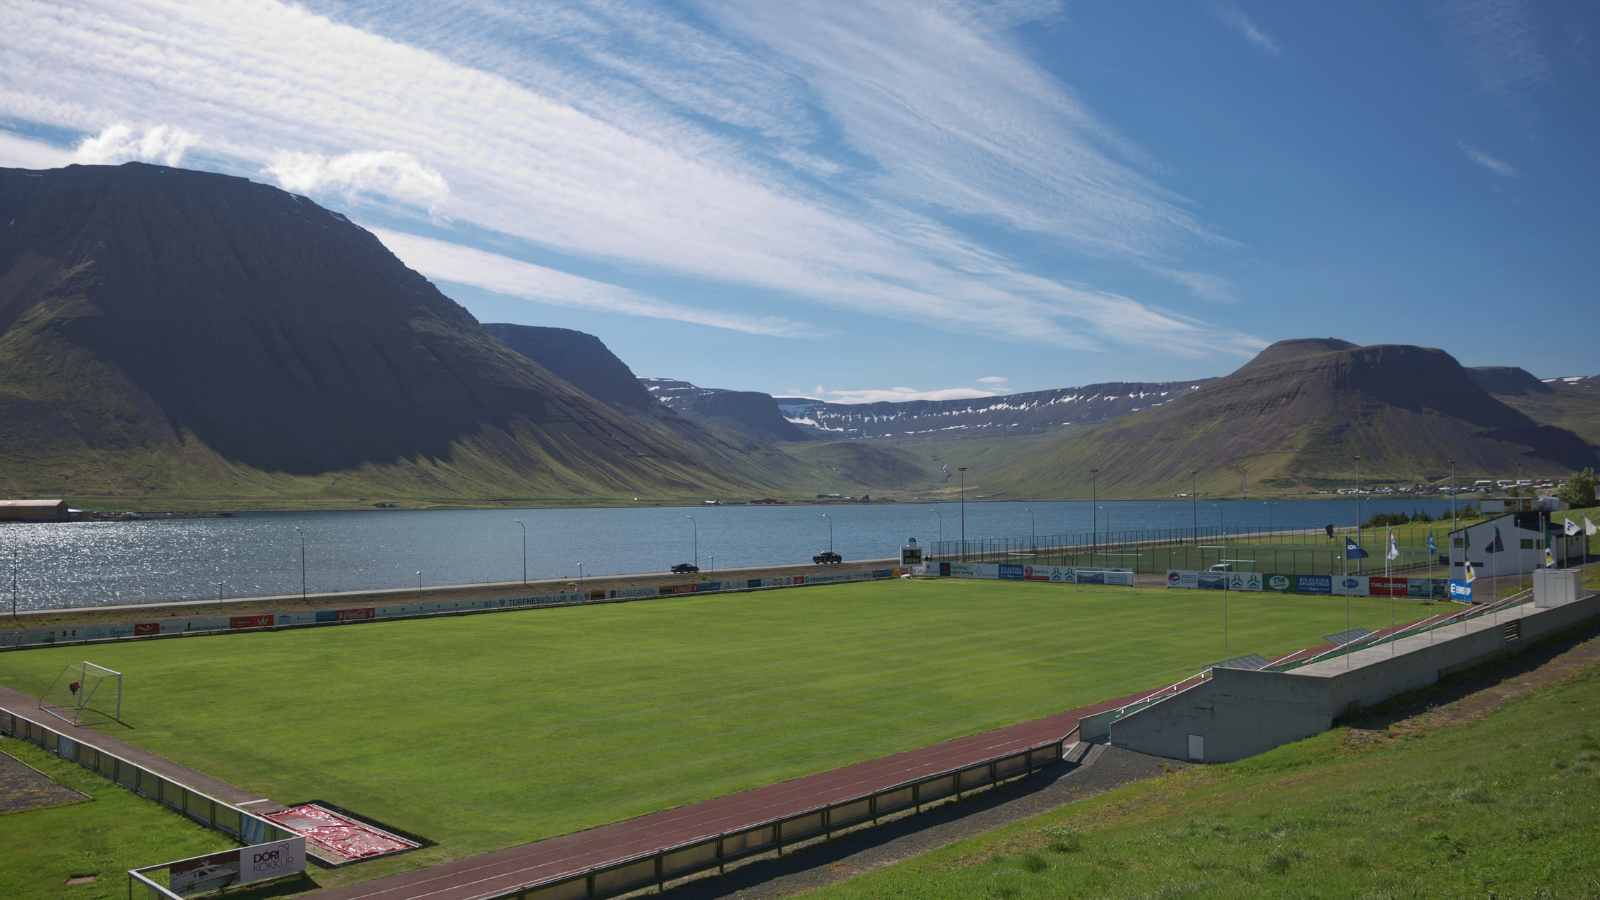 A football field in Isafjordur, Iceland.